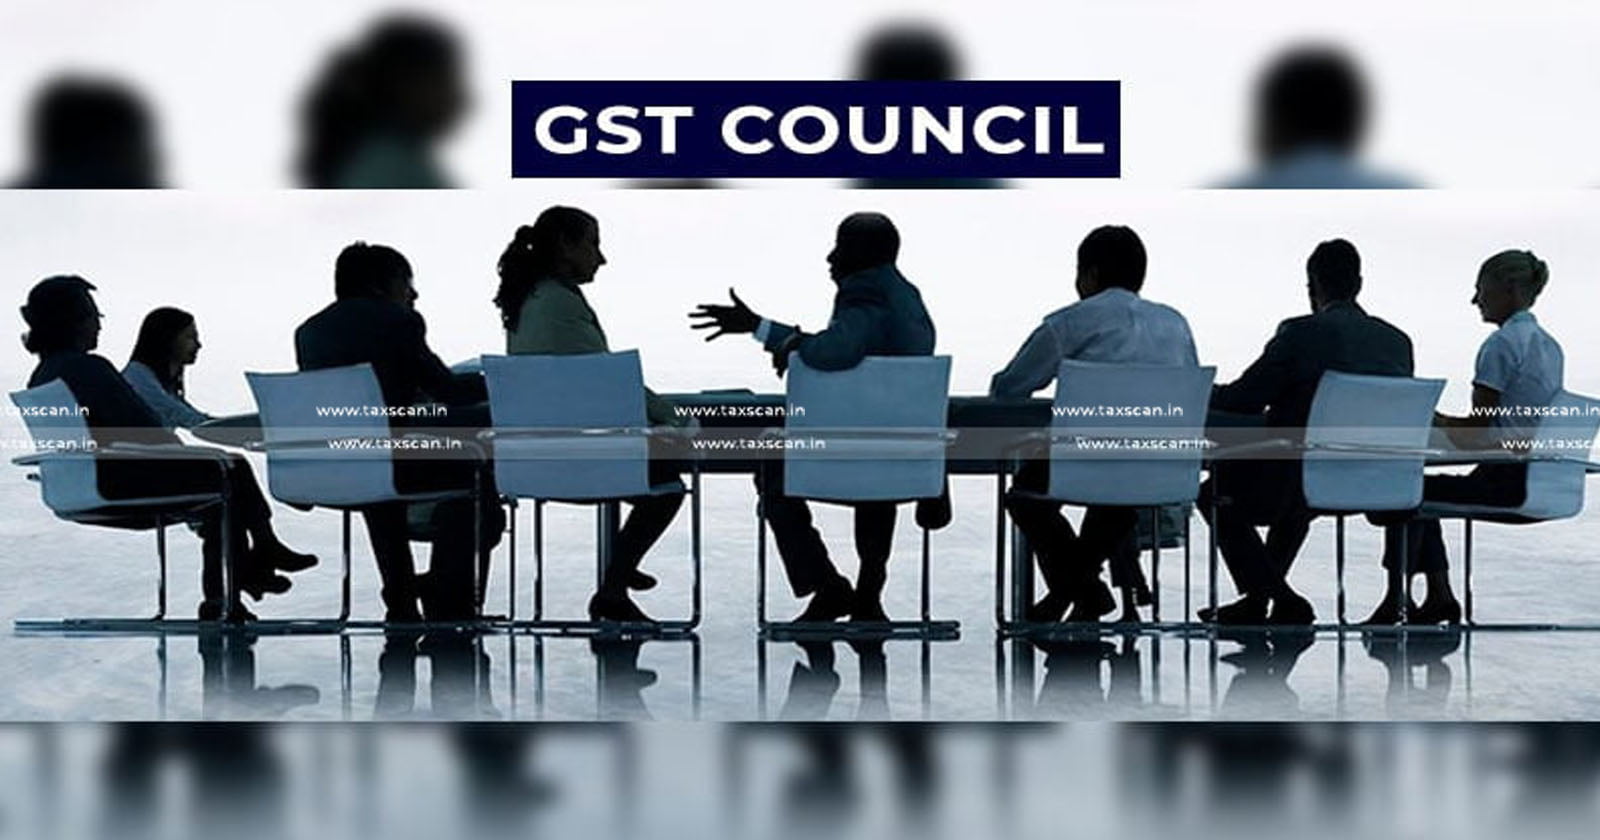 GST Council - GST Council Clarifies to Continue Relaxations - GST Council Clarifies to Continue Relaxations in respect of FORM GSTR-9 - taxscan